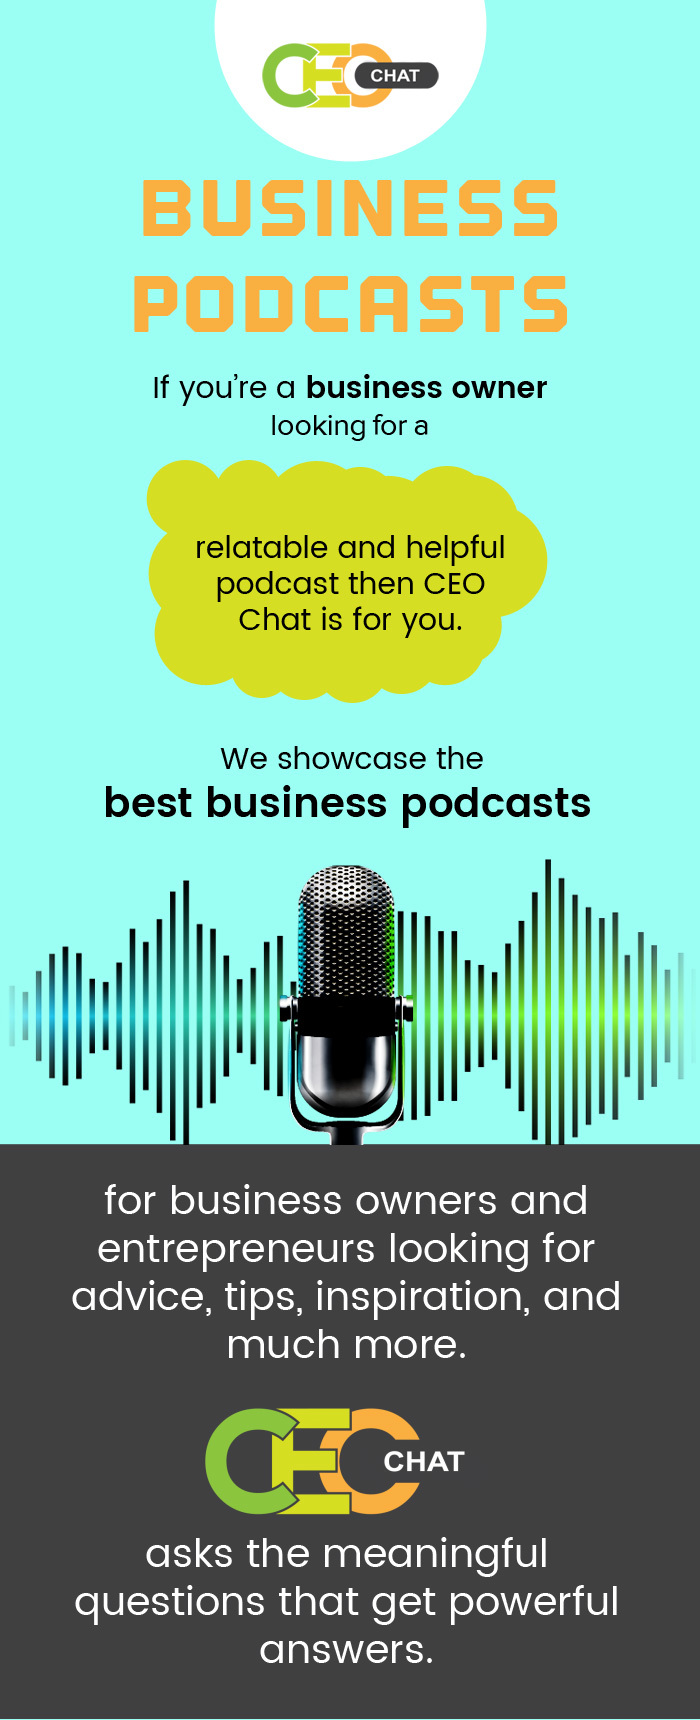 Listen to the Best Business Podcasts for Startups at CEO Chat